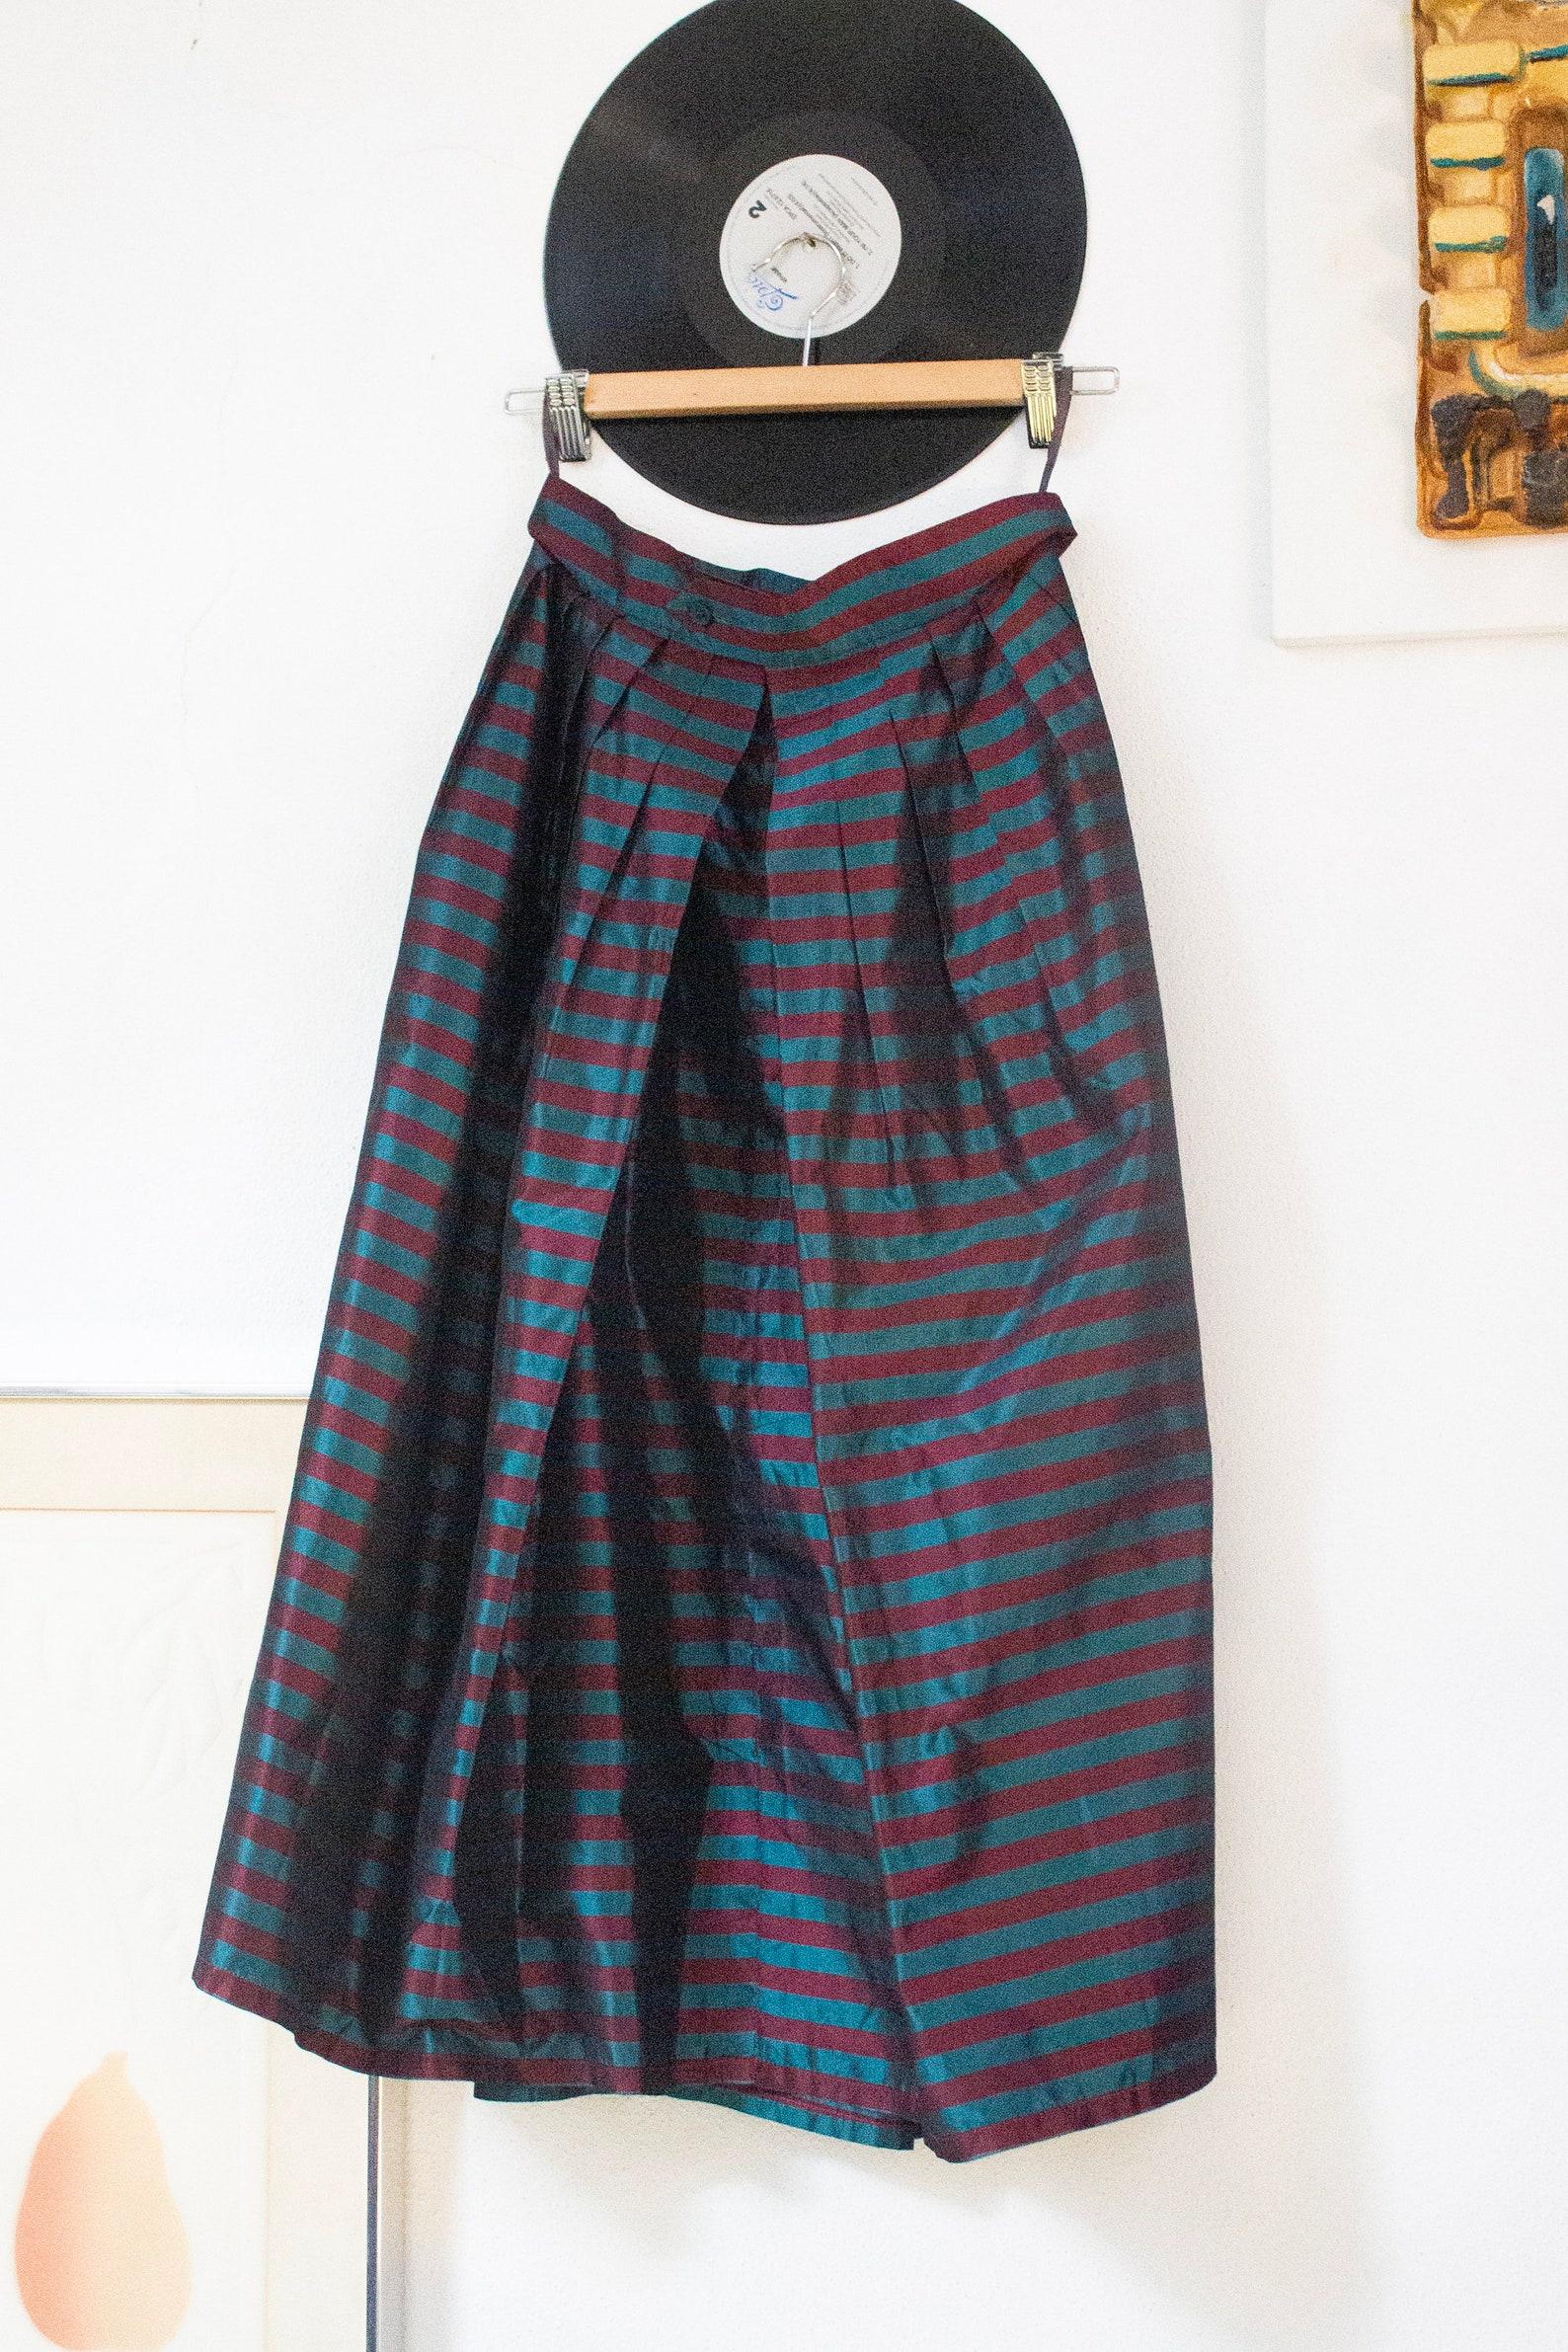 Saint Laurent Rive Gauche fall/winter 1982 documented blue and red striped taffeta high waisted pleated midi full skirt with side pockets (S)
Rare and collectible item from Saint Laurent Rive Gauche fall/winter 1982 runway show
Front button, zipper